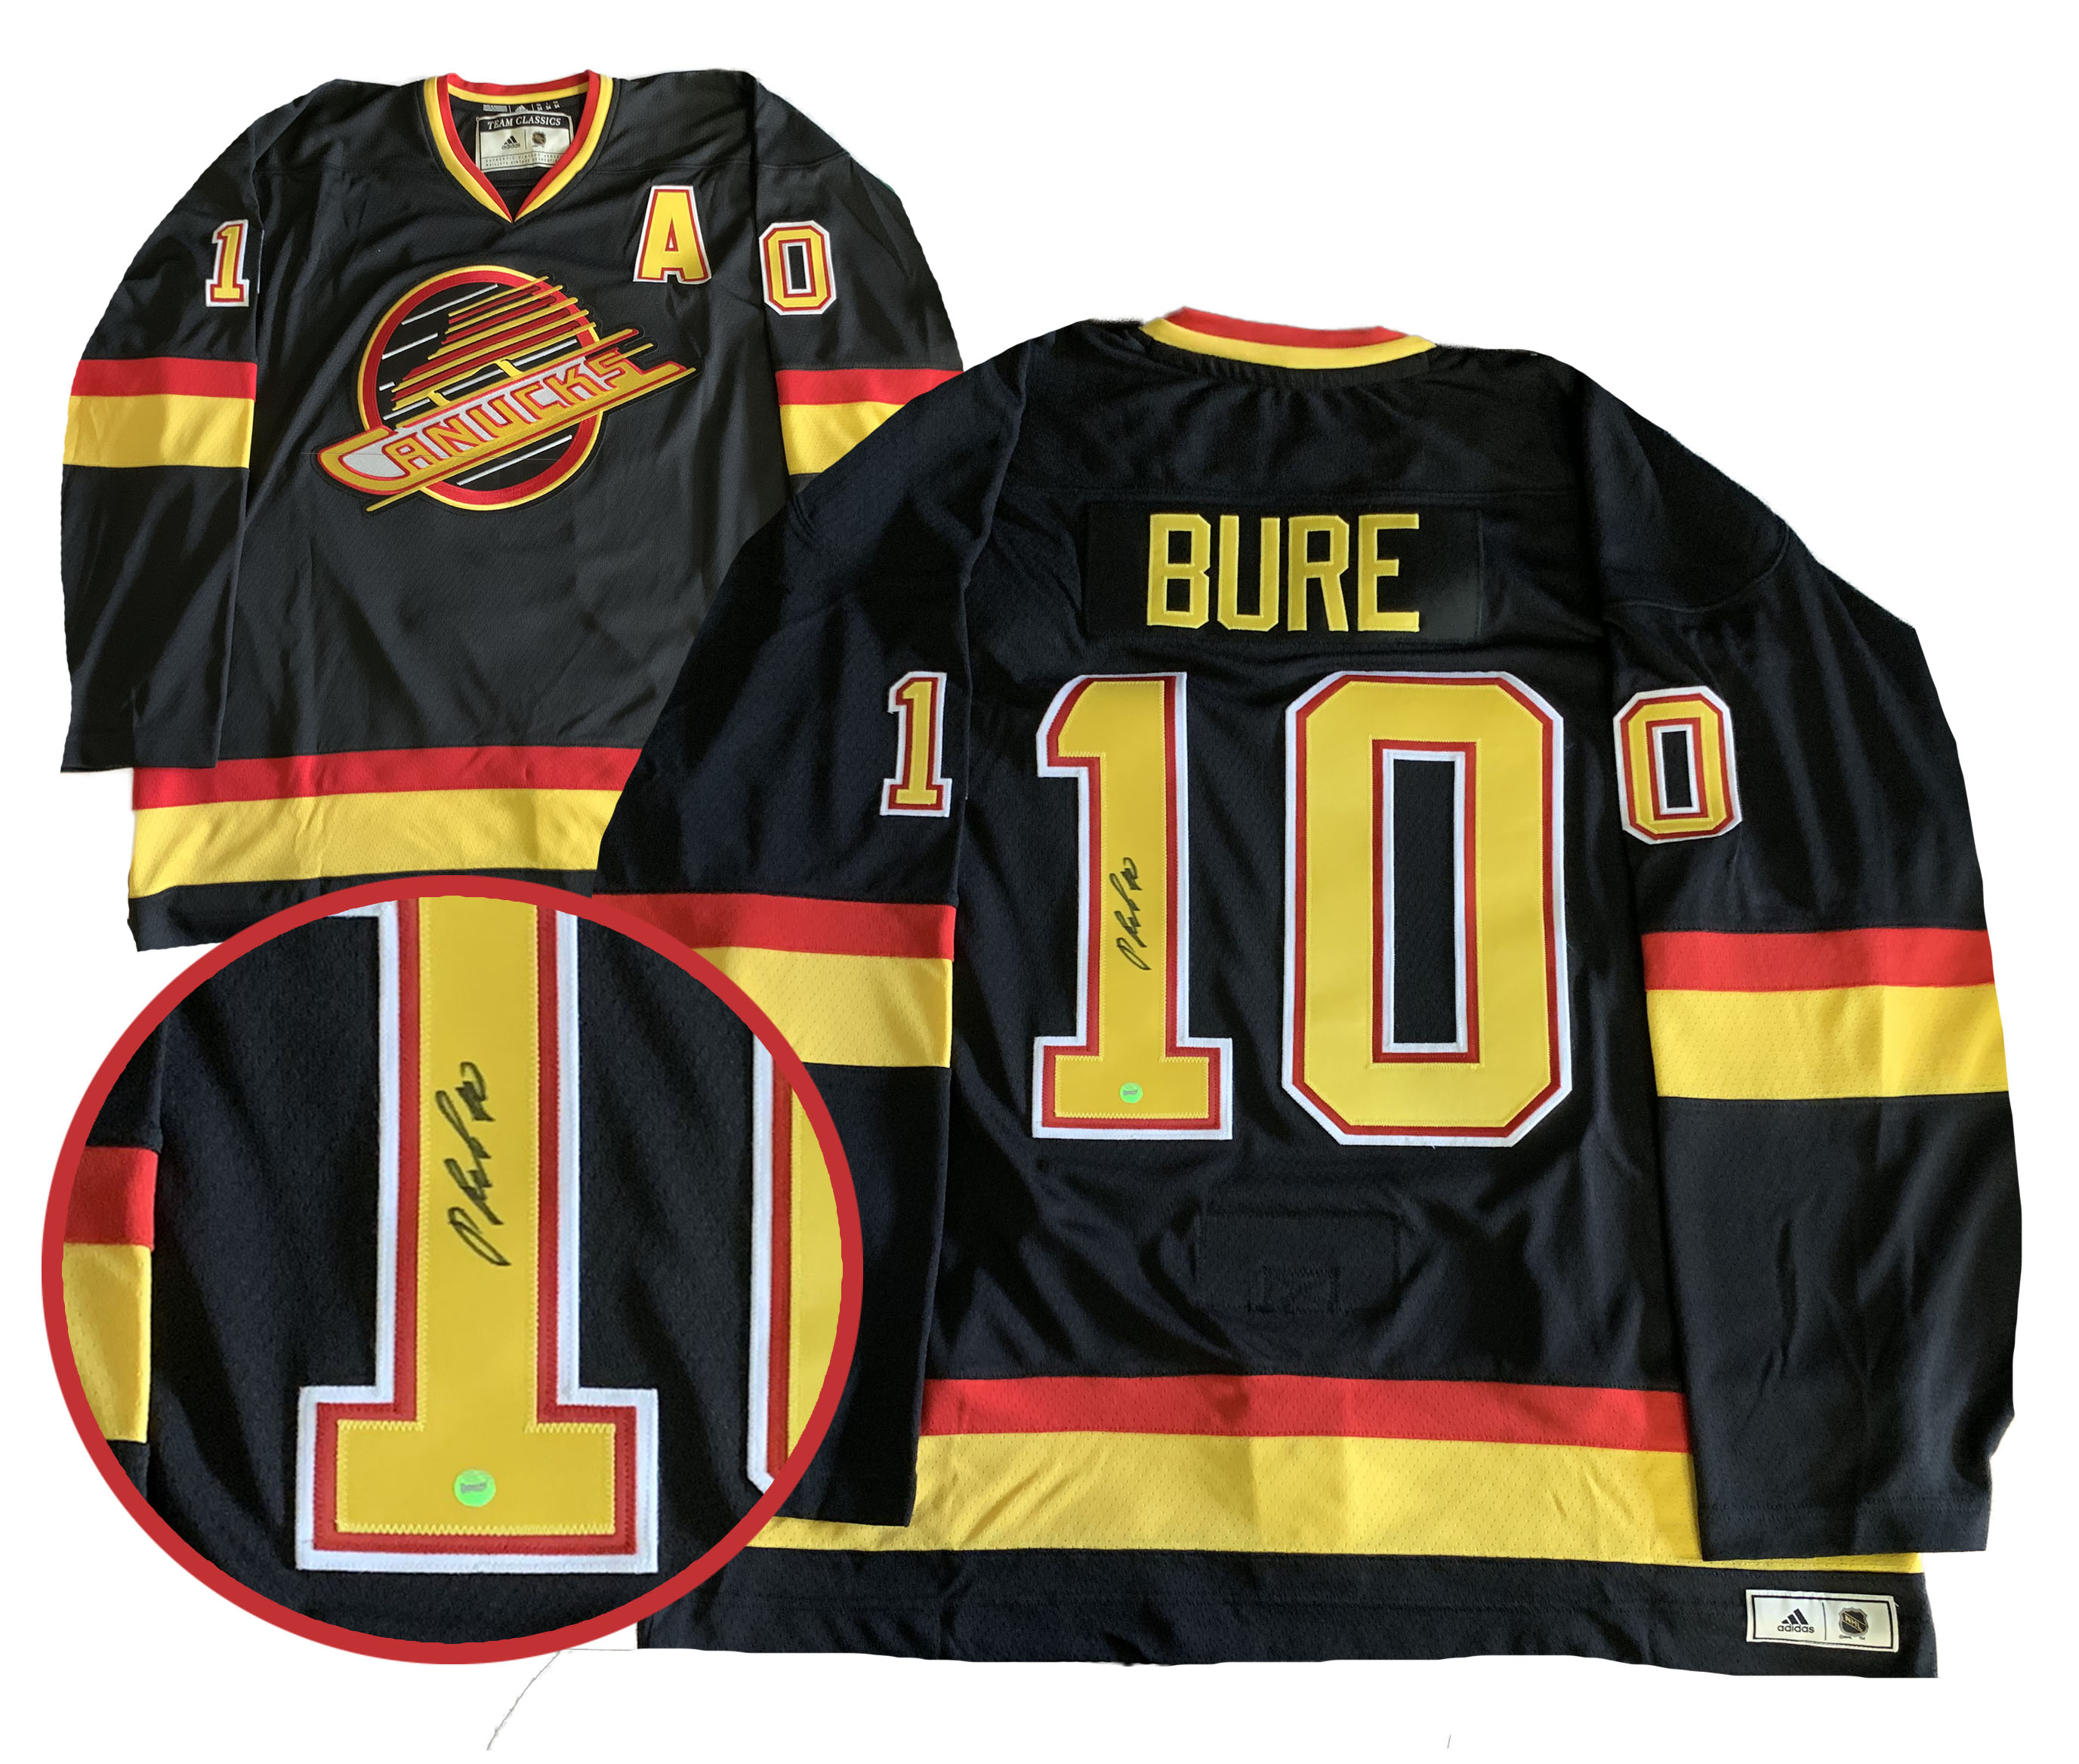 Sold at Auction: Authentic Pavel Bure Autographed Vancouver Canucks NHL  Jersey